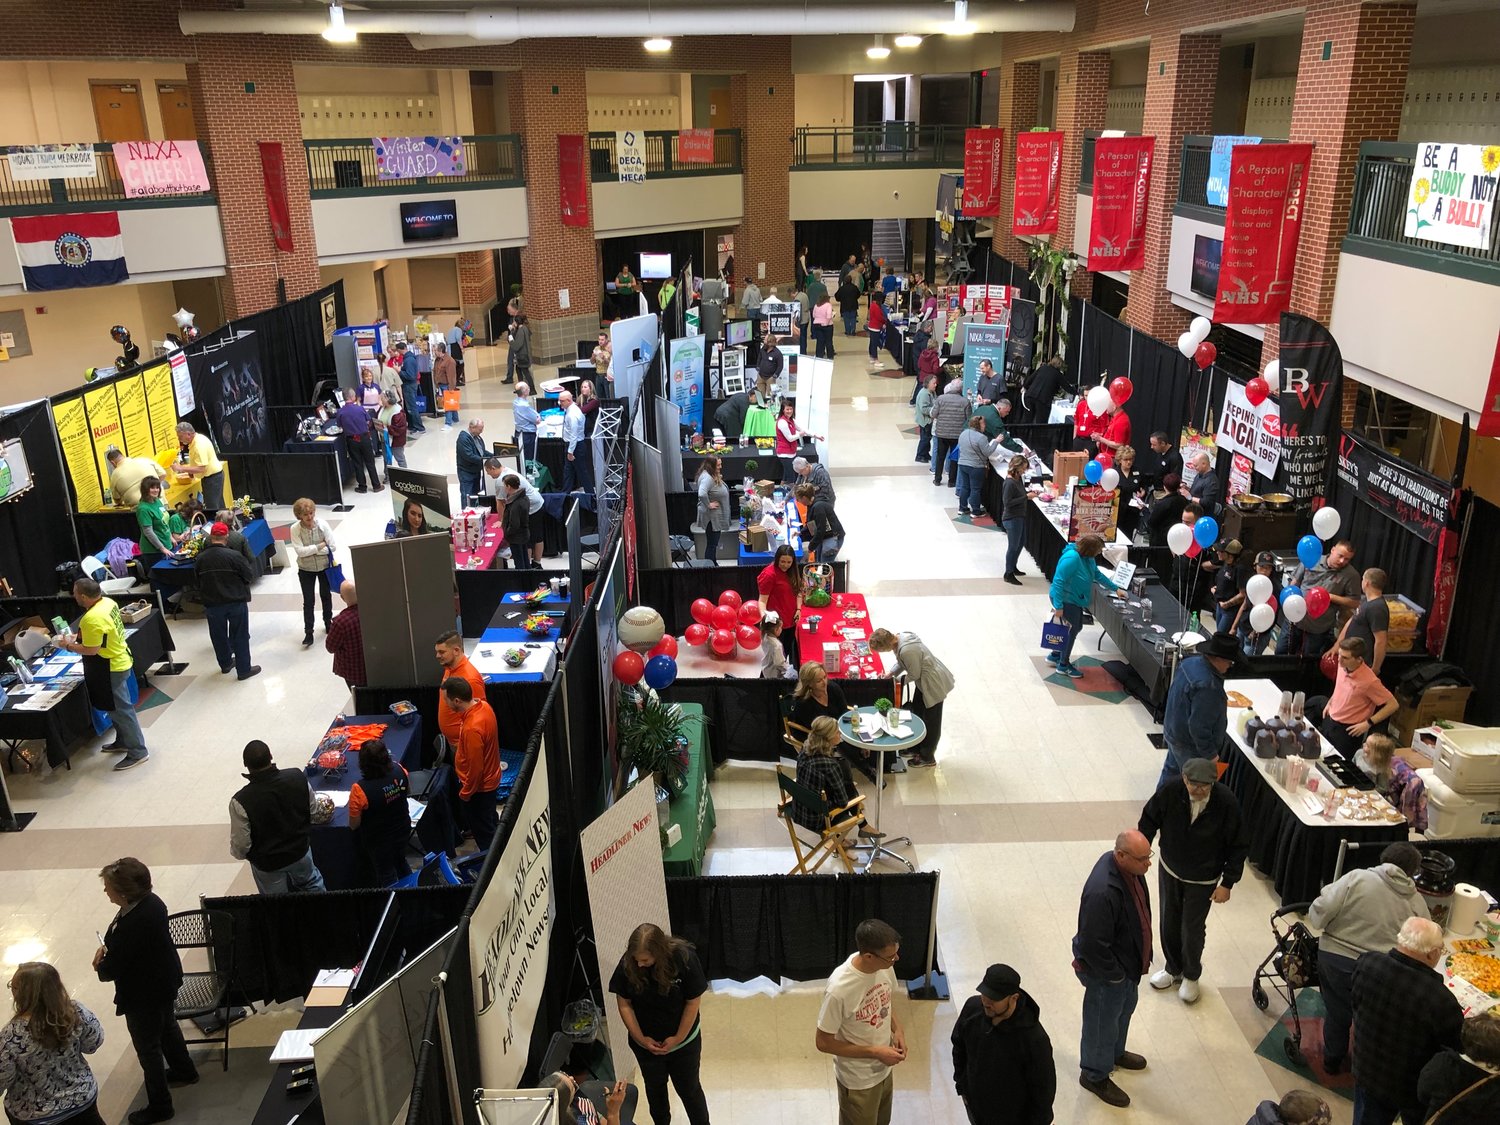 The Nixpo Business and Community Expo is set for March 19 at Nixa High School.